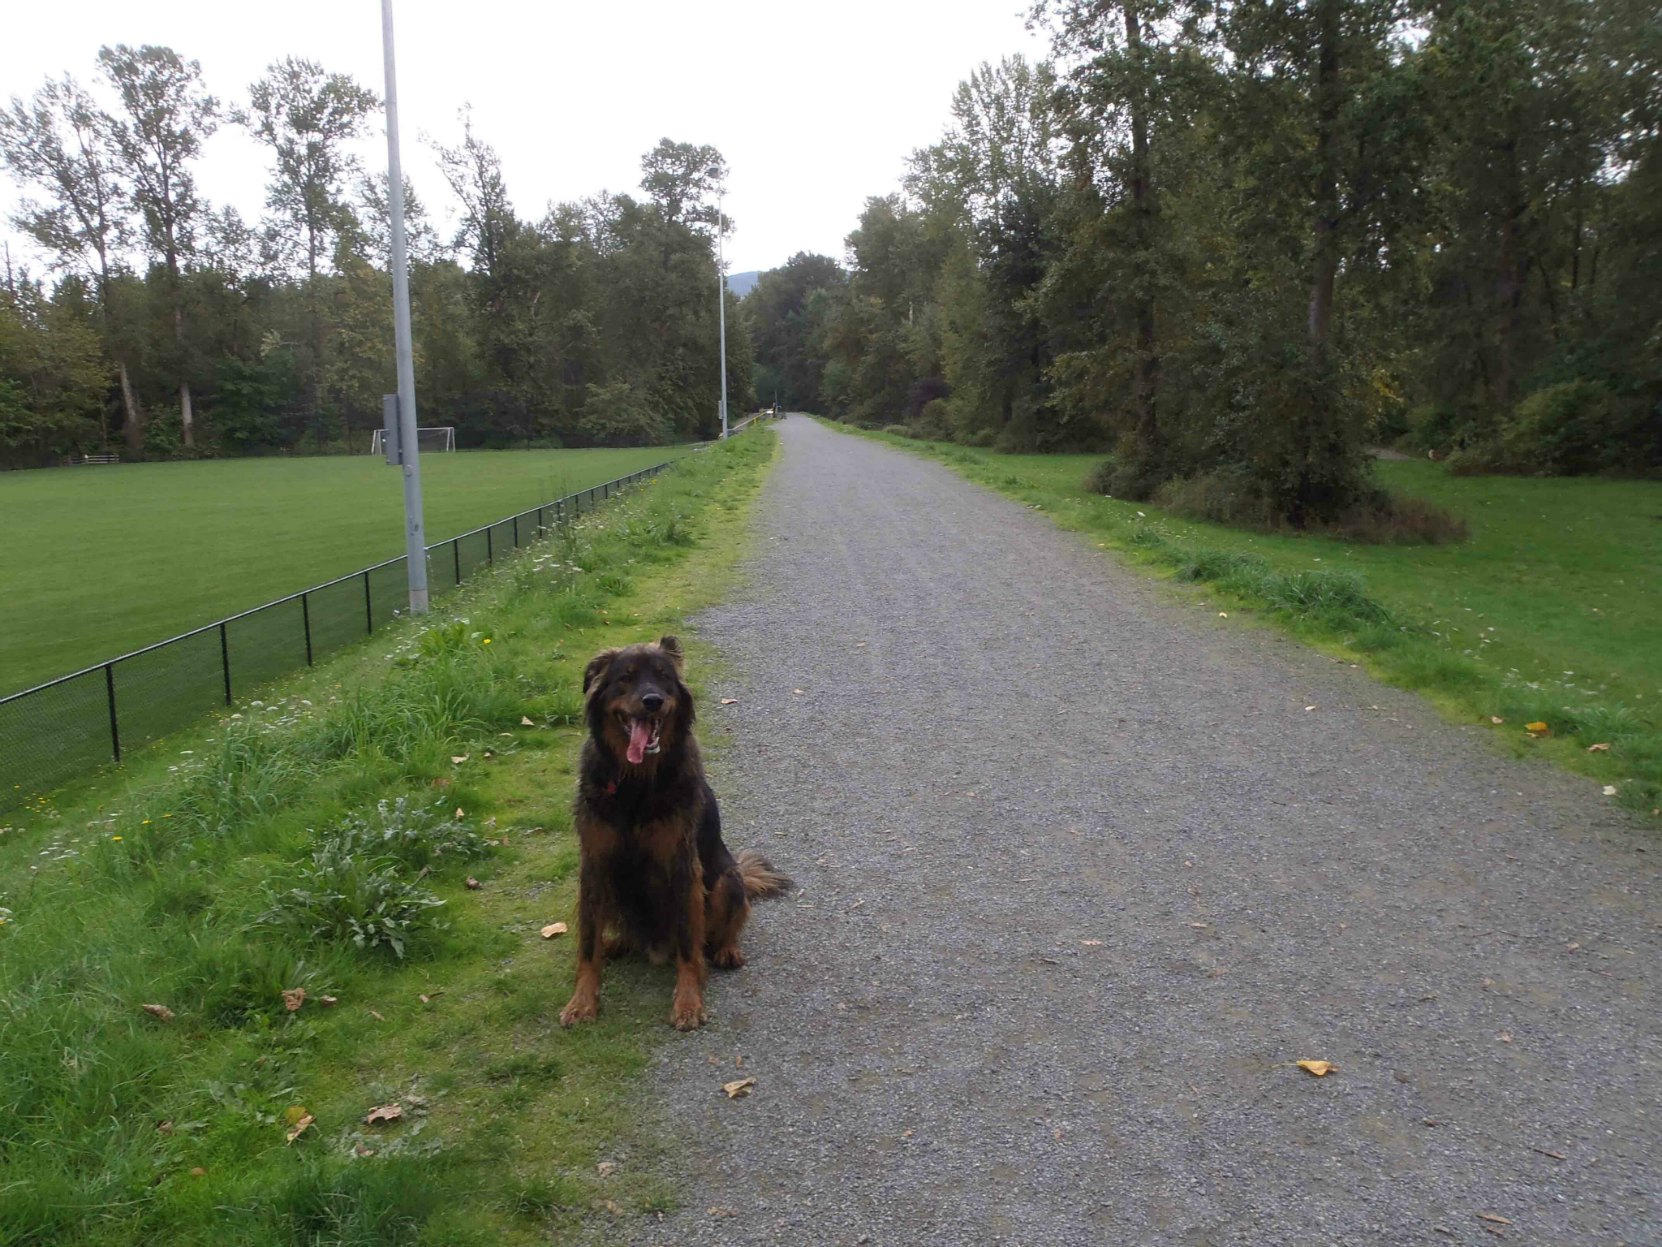 The Cowichan River dike in Duncan's Macadam Park. This dike project was undertaken under Mayor Douglas W. Barker. It's also a popular off leash park for dogs.